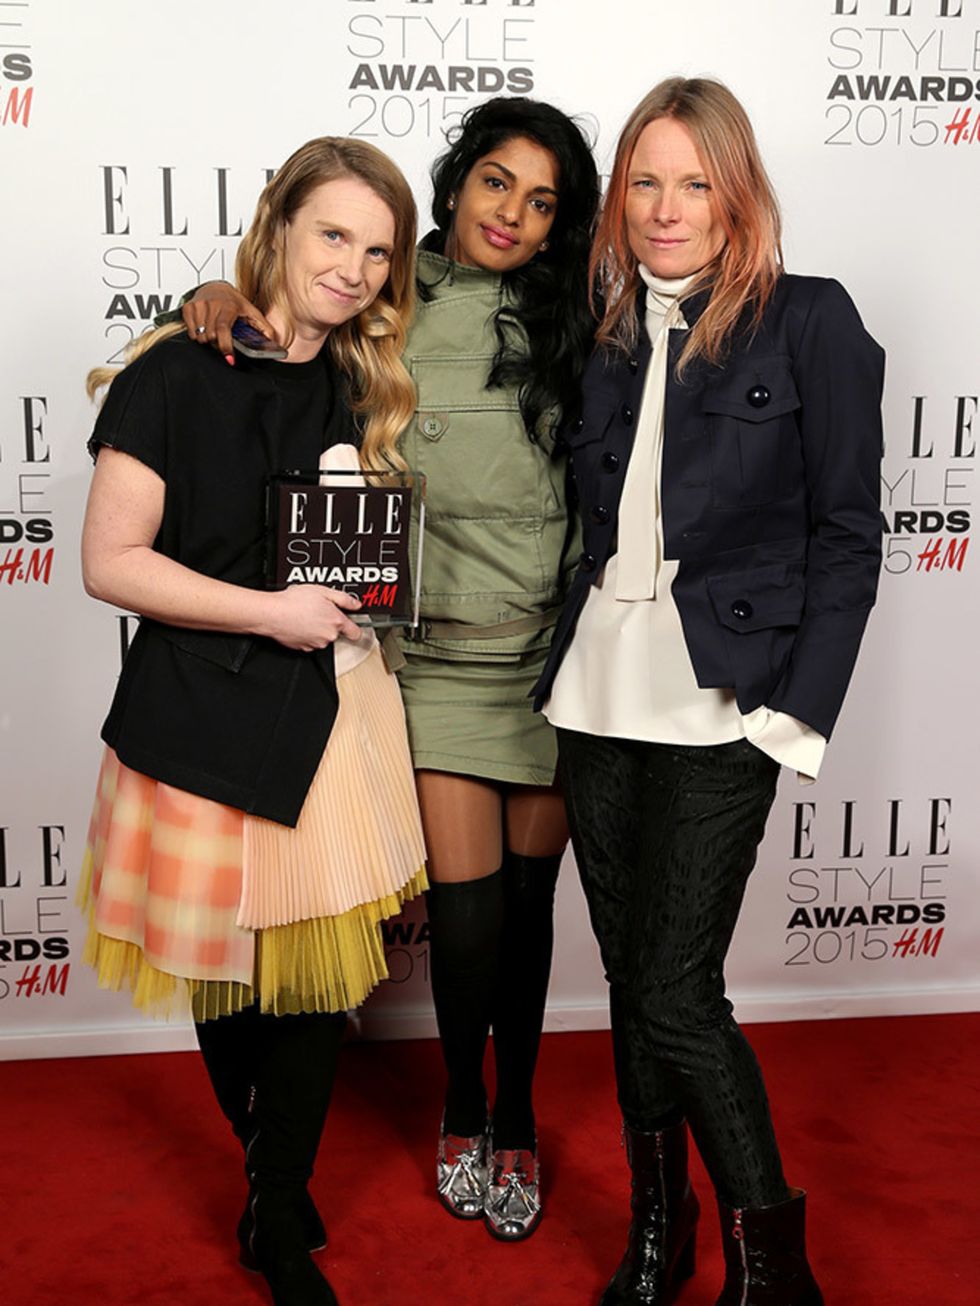 <p>The winners of the Contemporary Brand award for <a href="http://www.elleuk.com/catwalk/marc-by-marc-jacobs">Marc by Marc Jacobs</a>: <a href="http://www.elleuk.com/tags/katie-hillier">Katie Hillier</a> and <a href="http://www.elleuk.com/tags/luella-bar